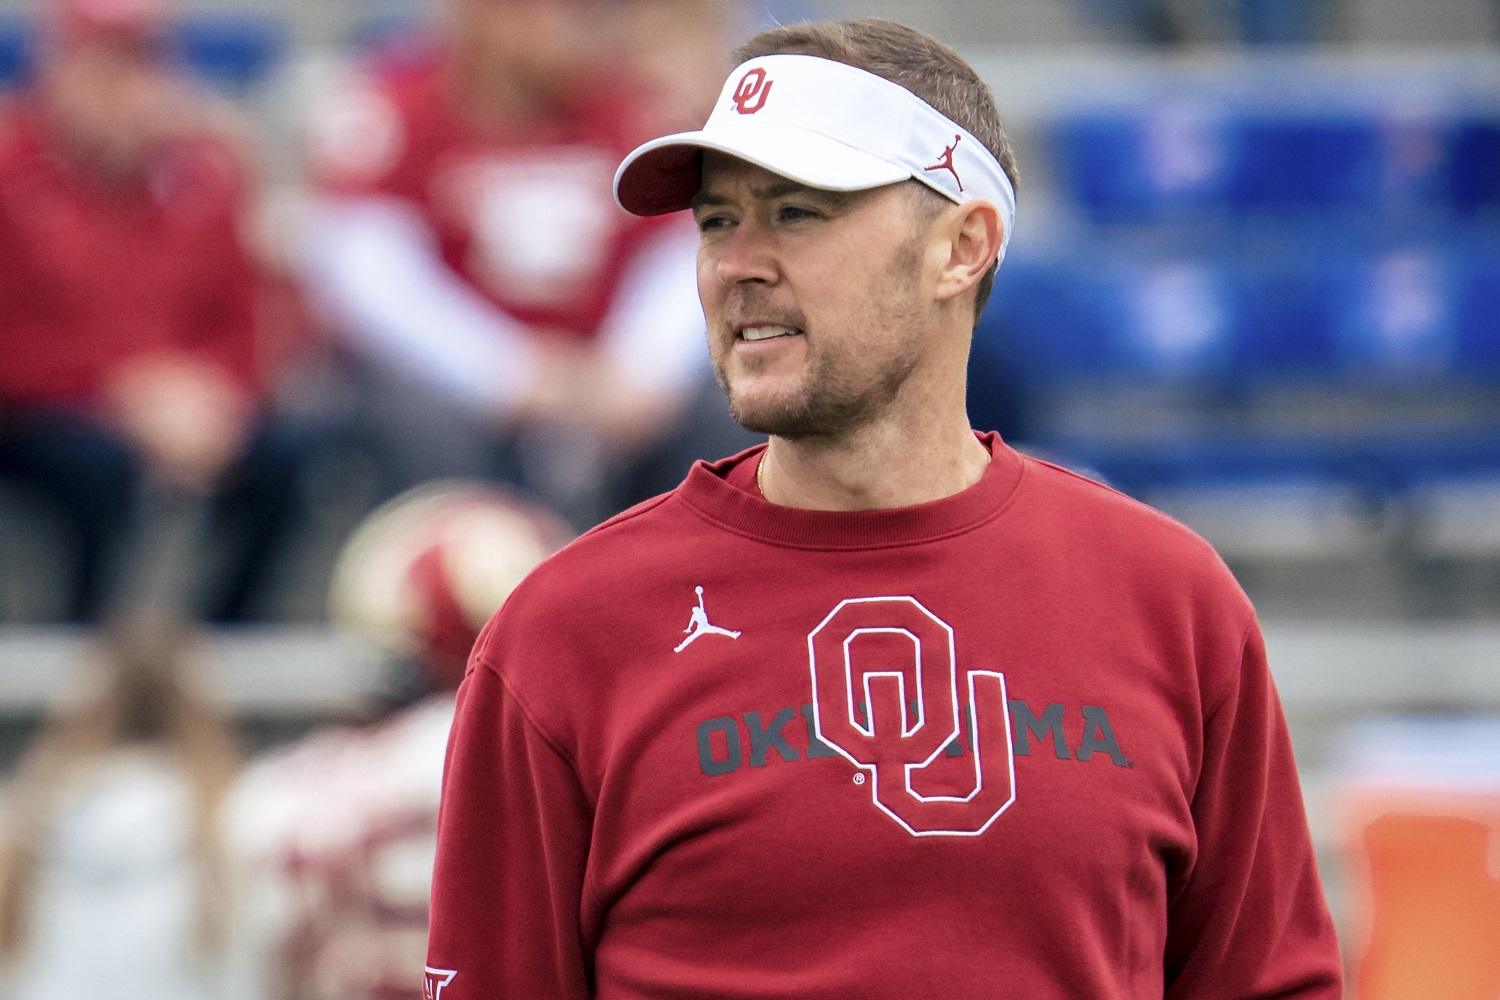 Head coach Lincoln Riley of the Oklahoma Sooners talks to players during warmups before taking on the Kansas Jayhawks on Oct. 23, 2021 in Lawrence, Kansas.